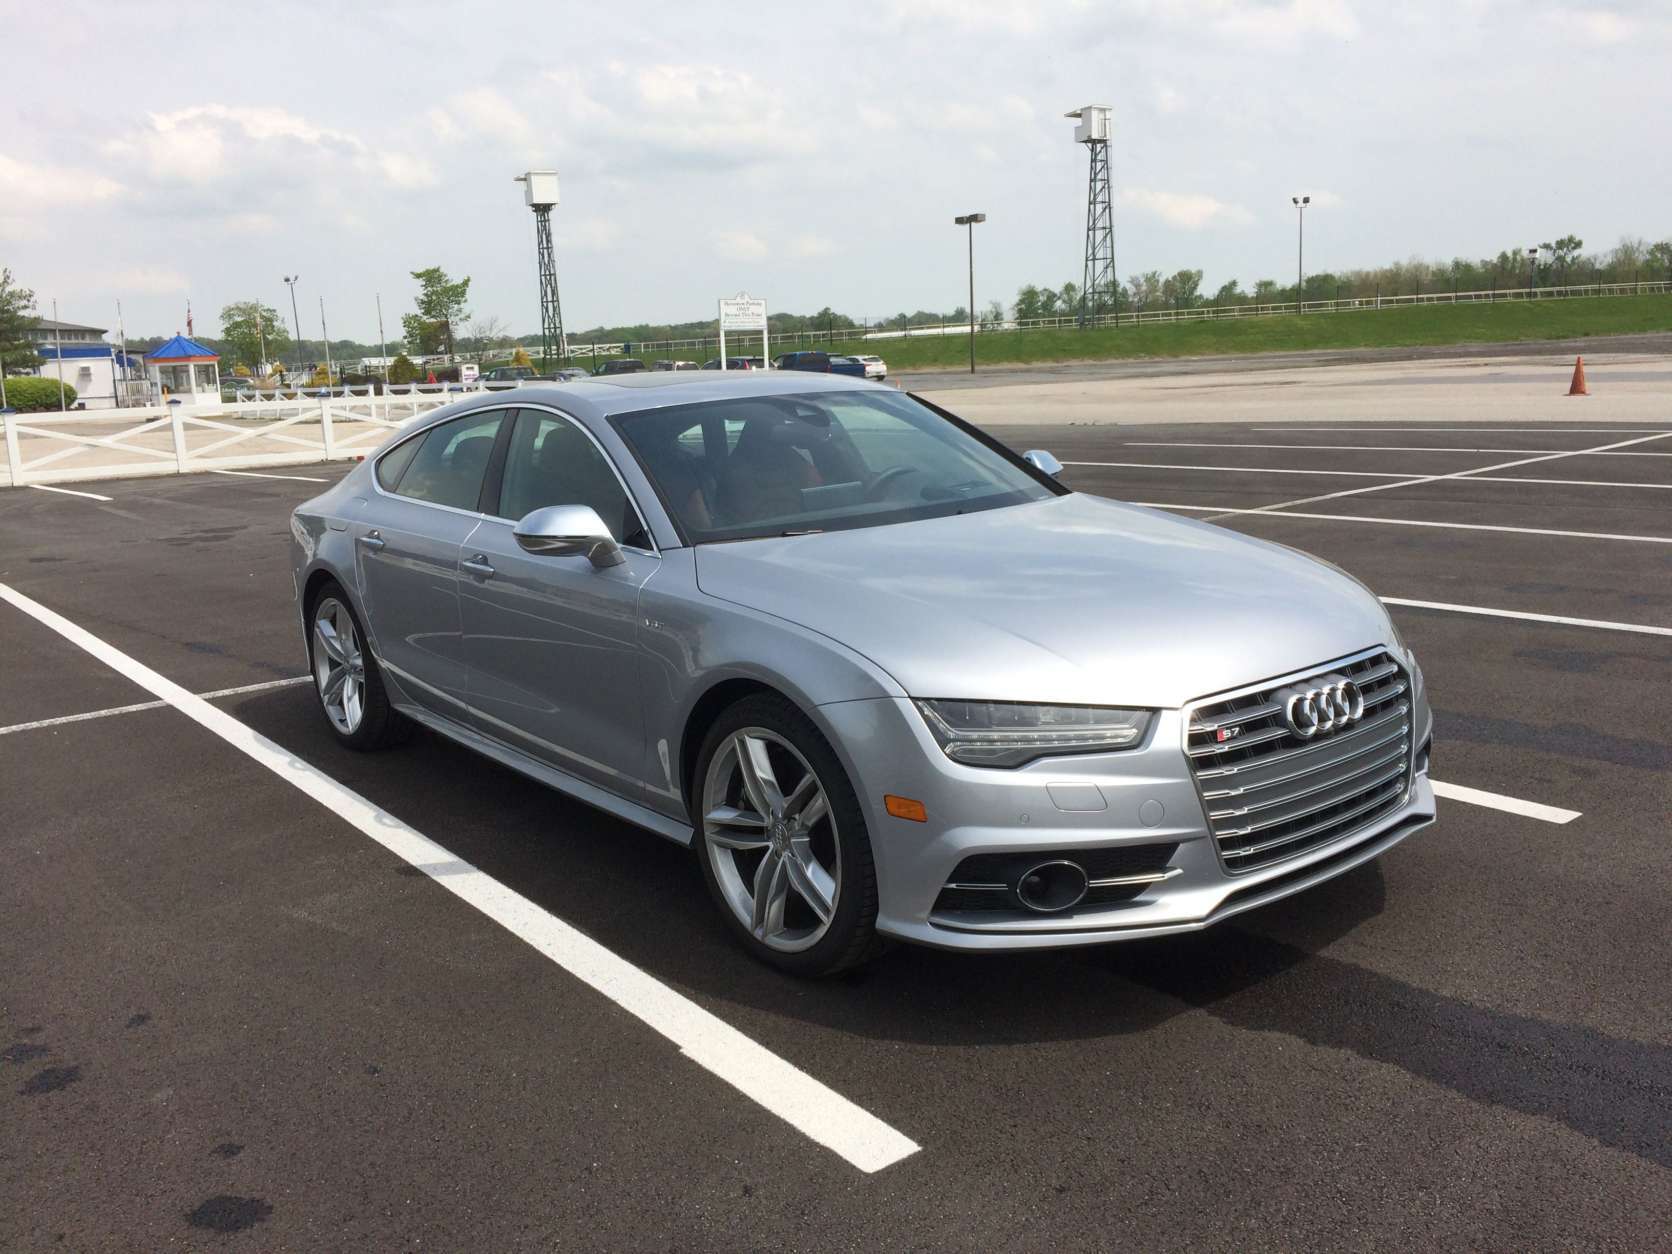 WTOP car guy Mike Parris says the Audi is cracking the code of combining good looks with a spacious trunk with the 2017 Audi S7. (WTOP/Mike Parris) 